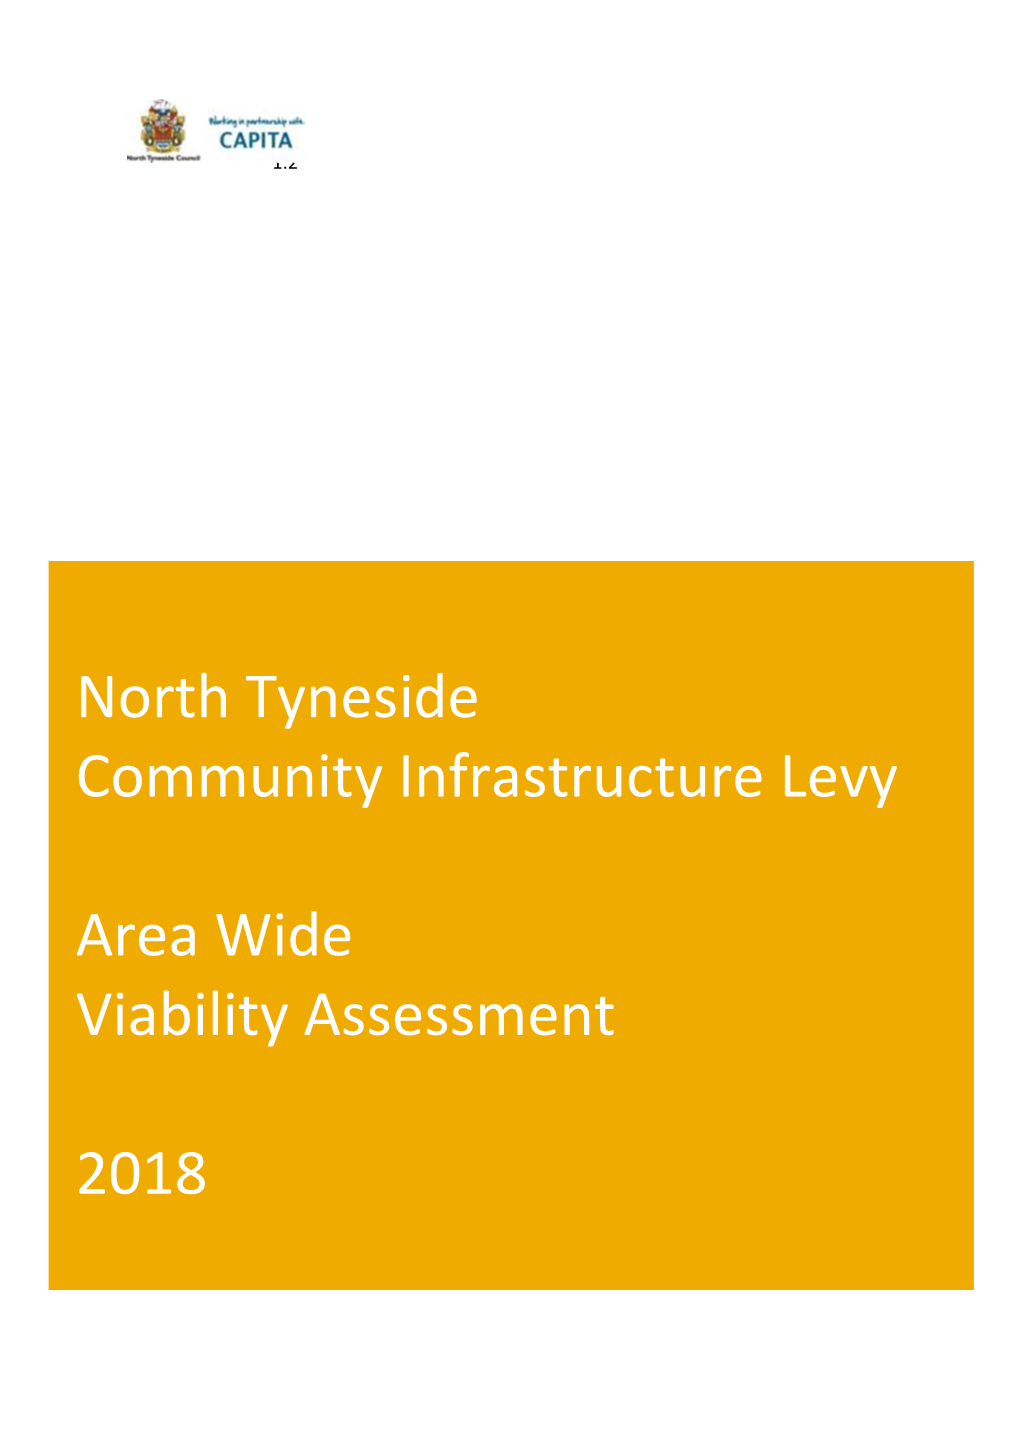 North Tyneside Community Infrastructure Levy Area Wide